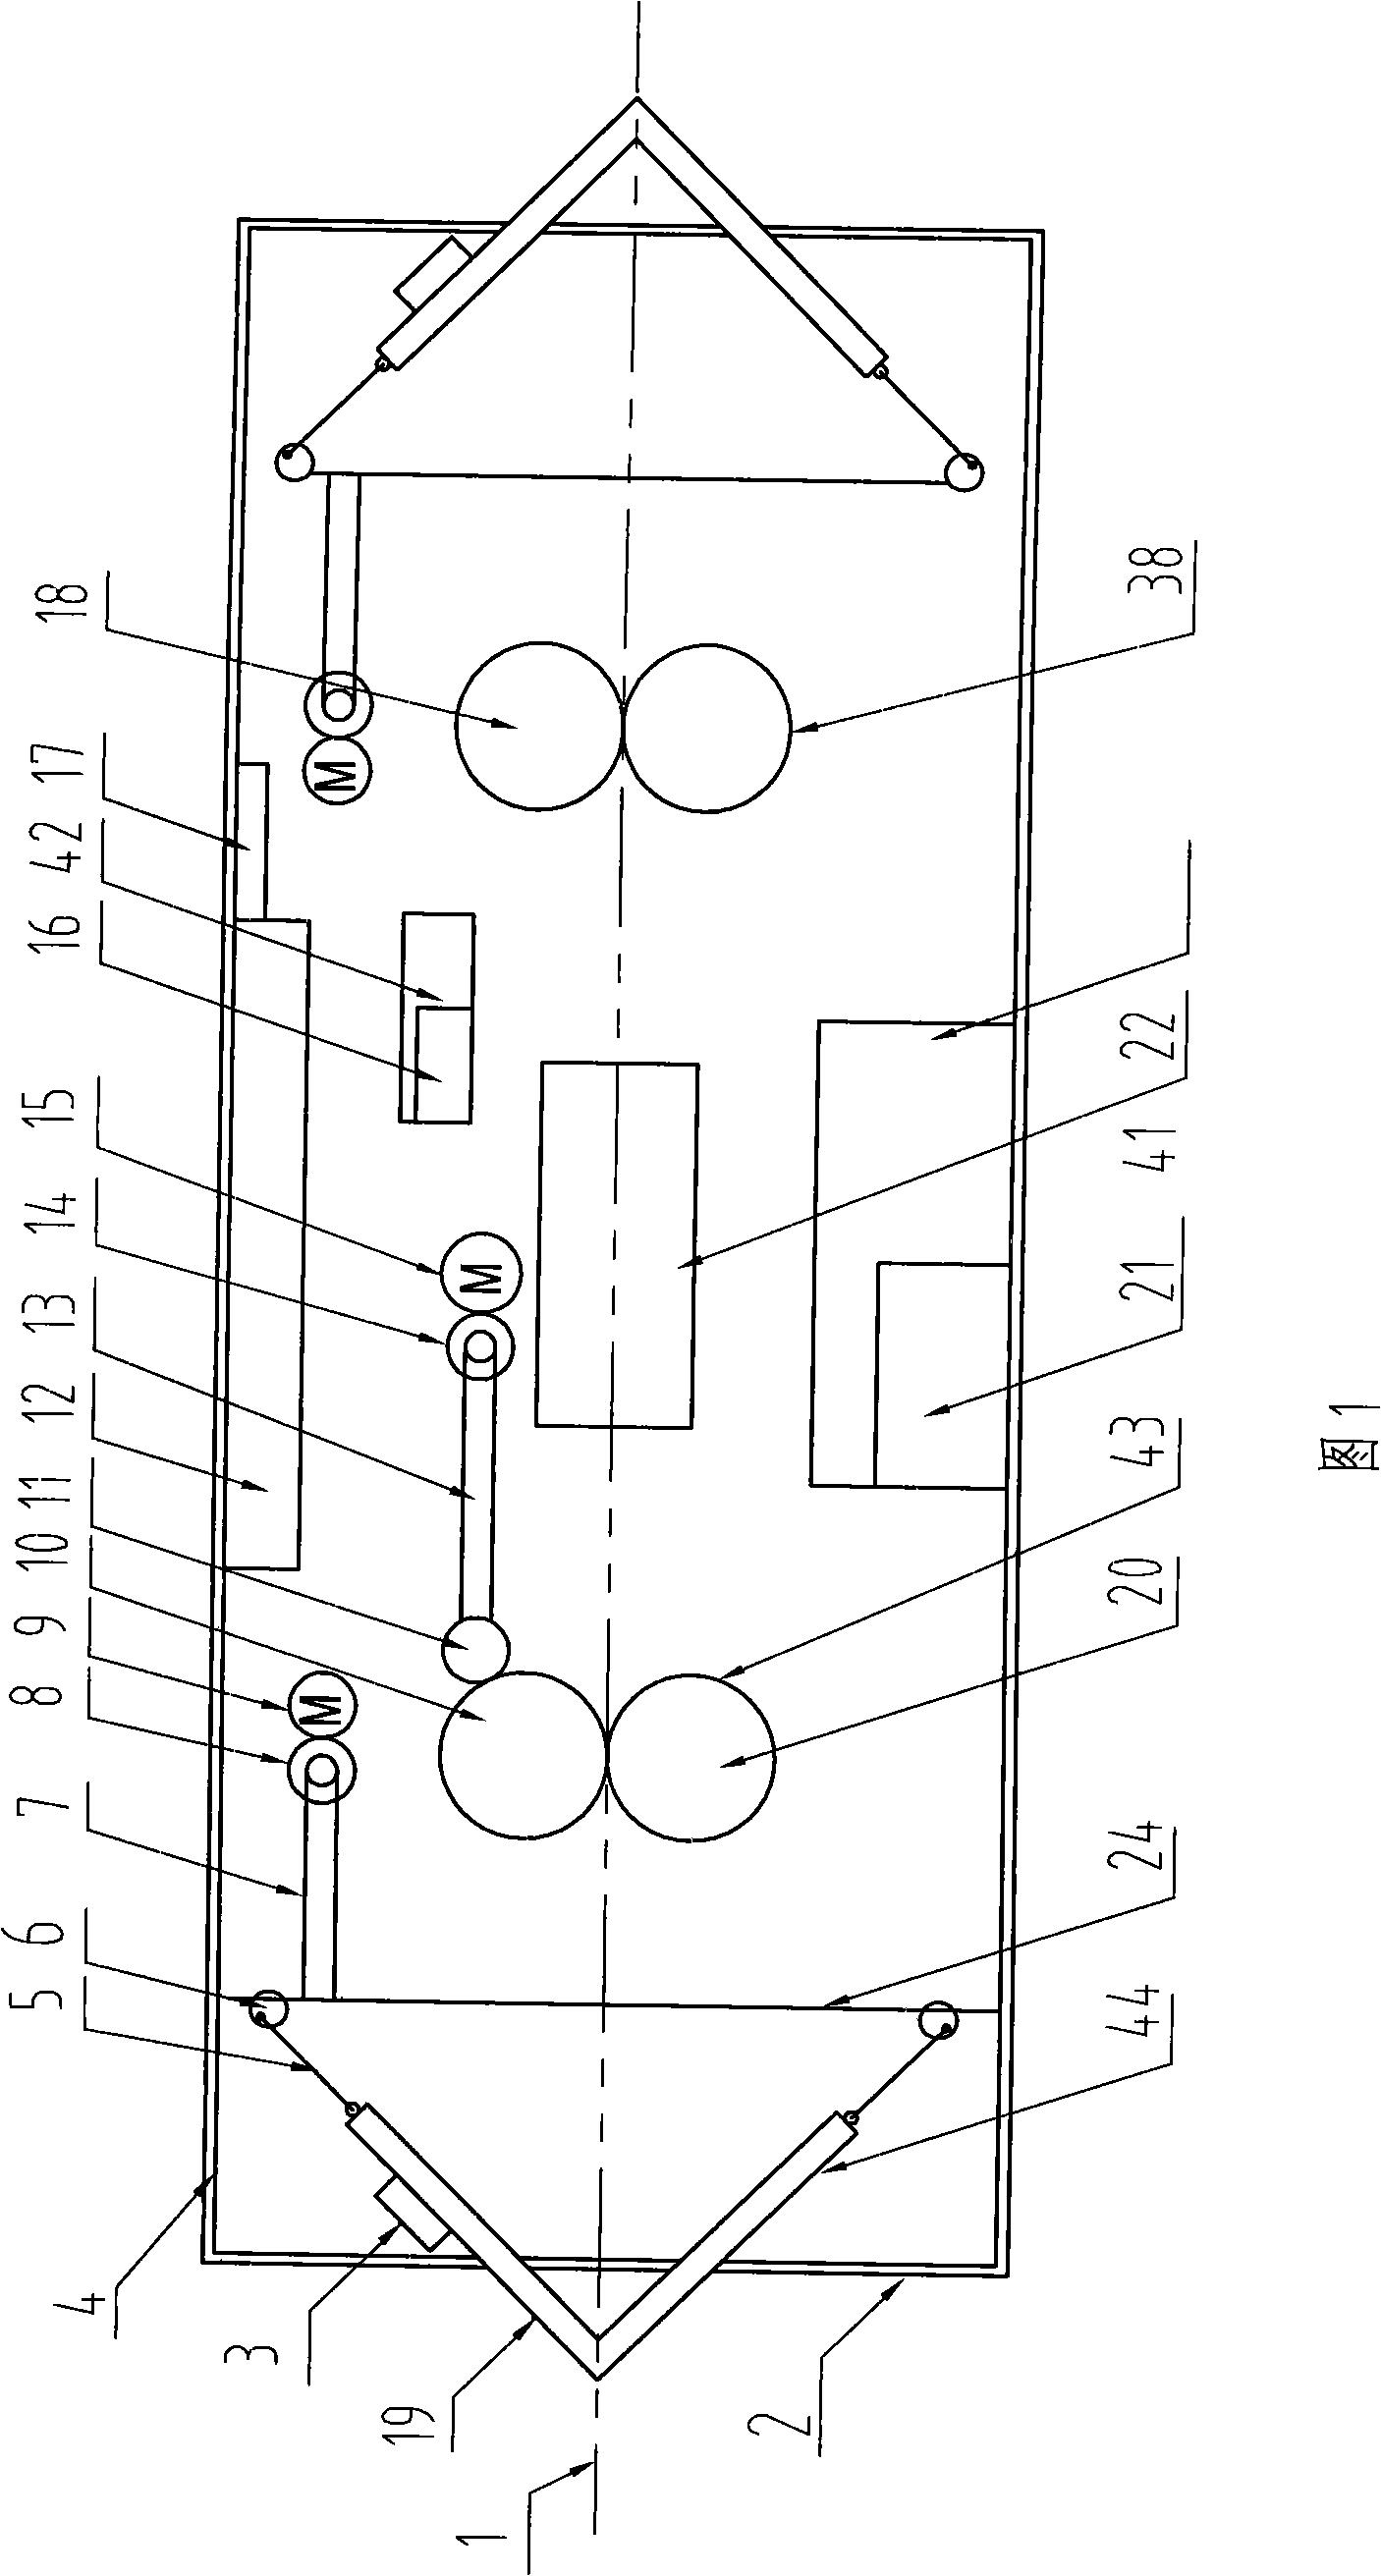 Method and apparatus for deicing of high voltage wire